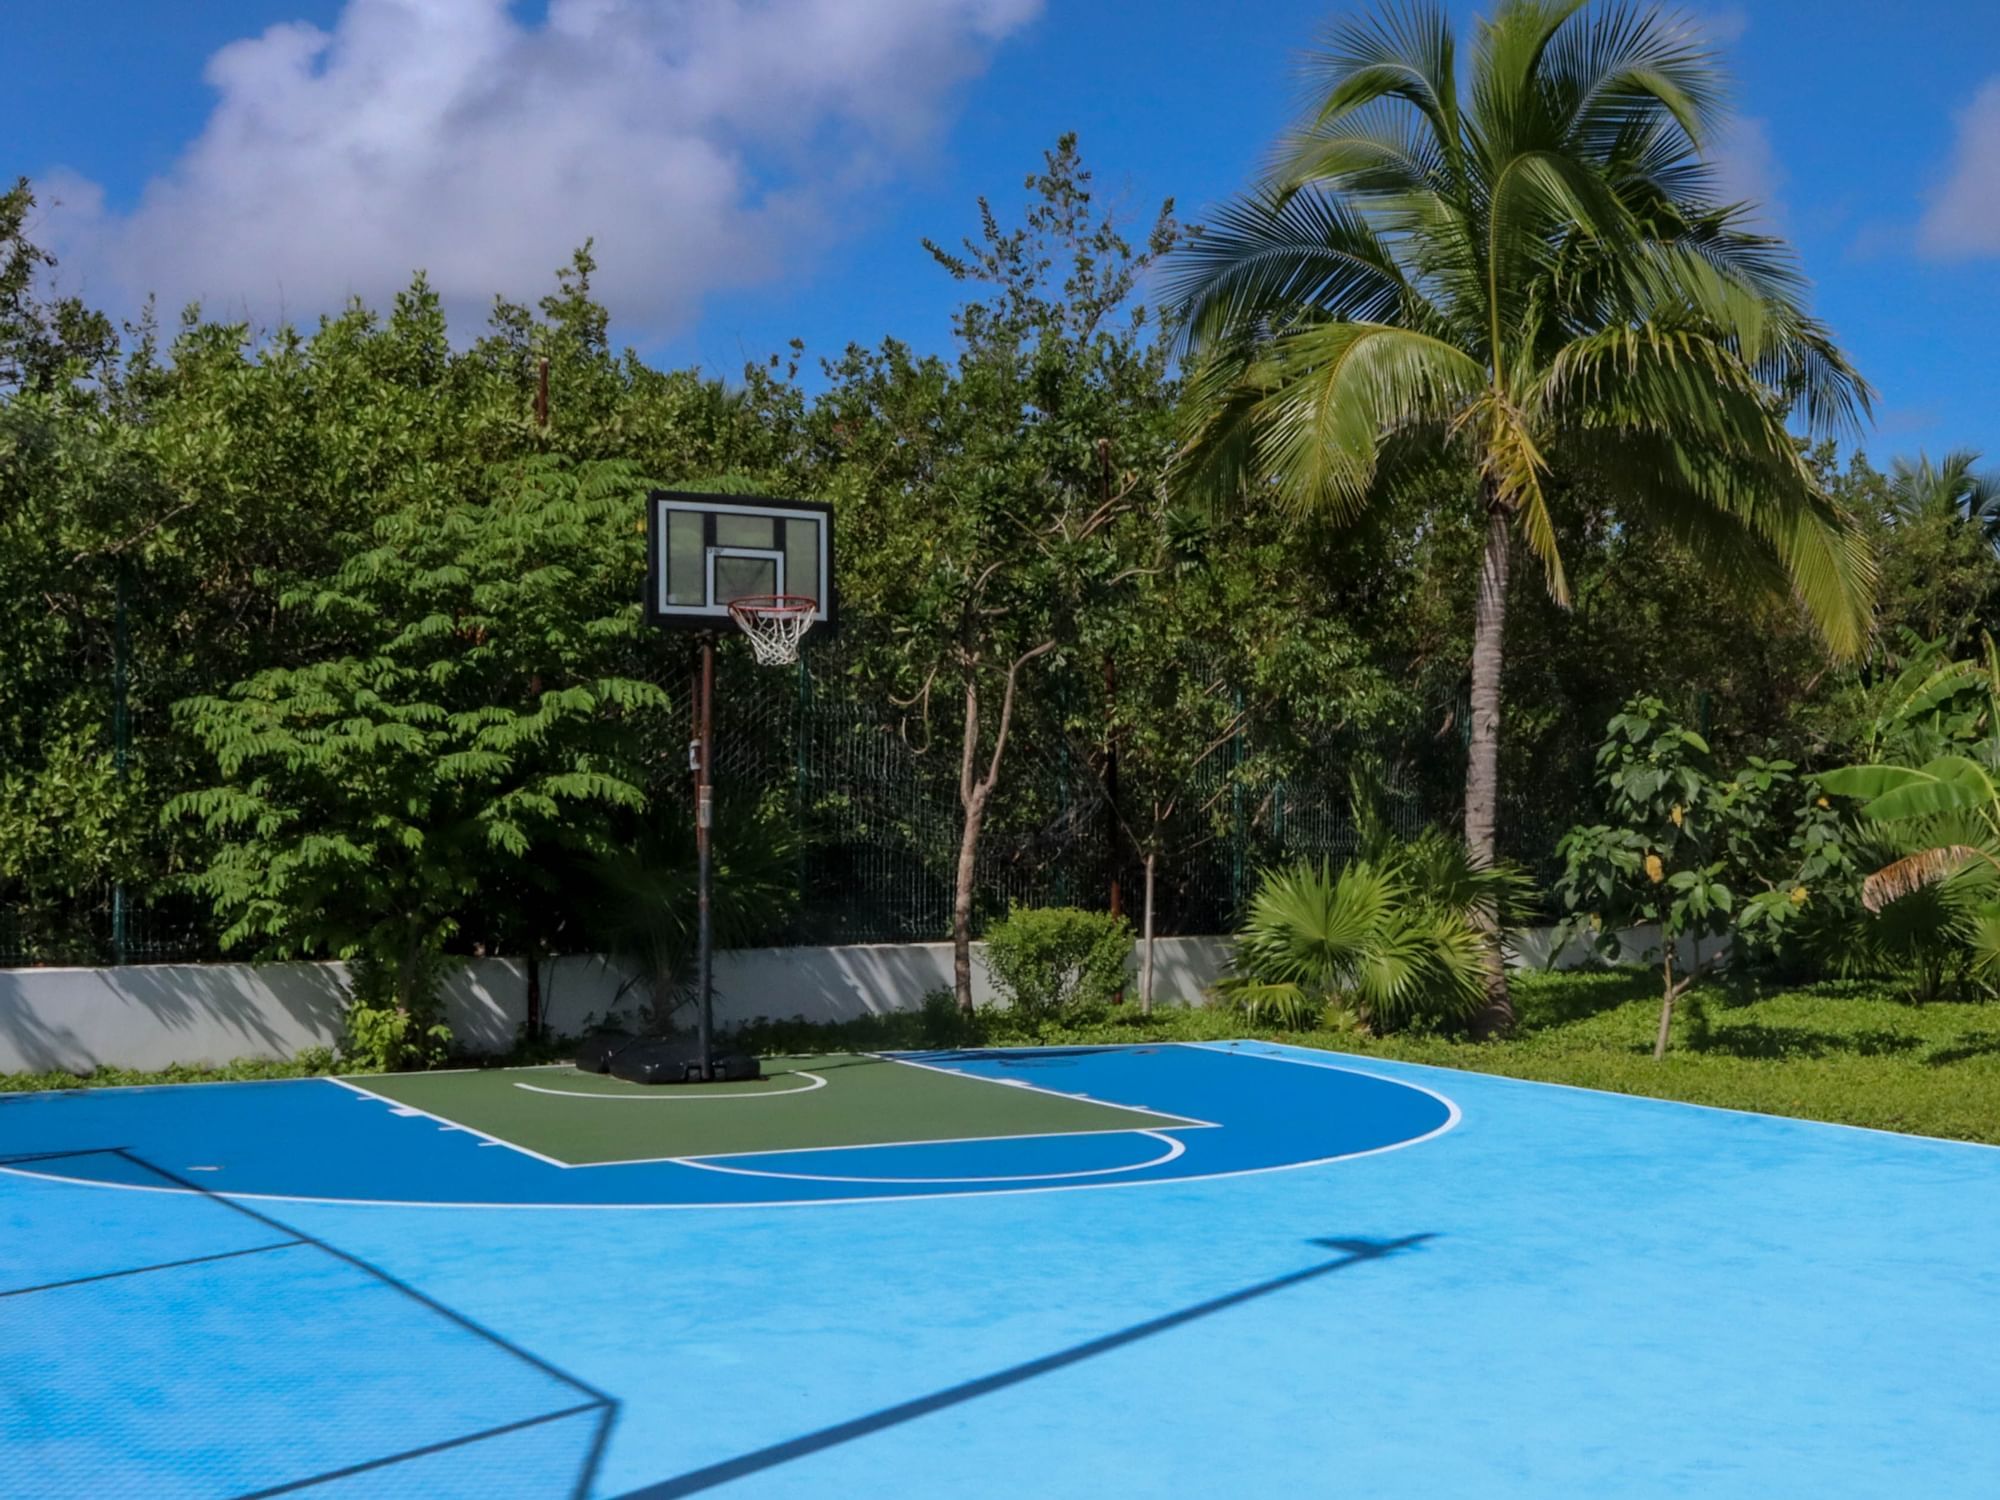 Outdoor basketball court at Haven Riviera Cancun